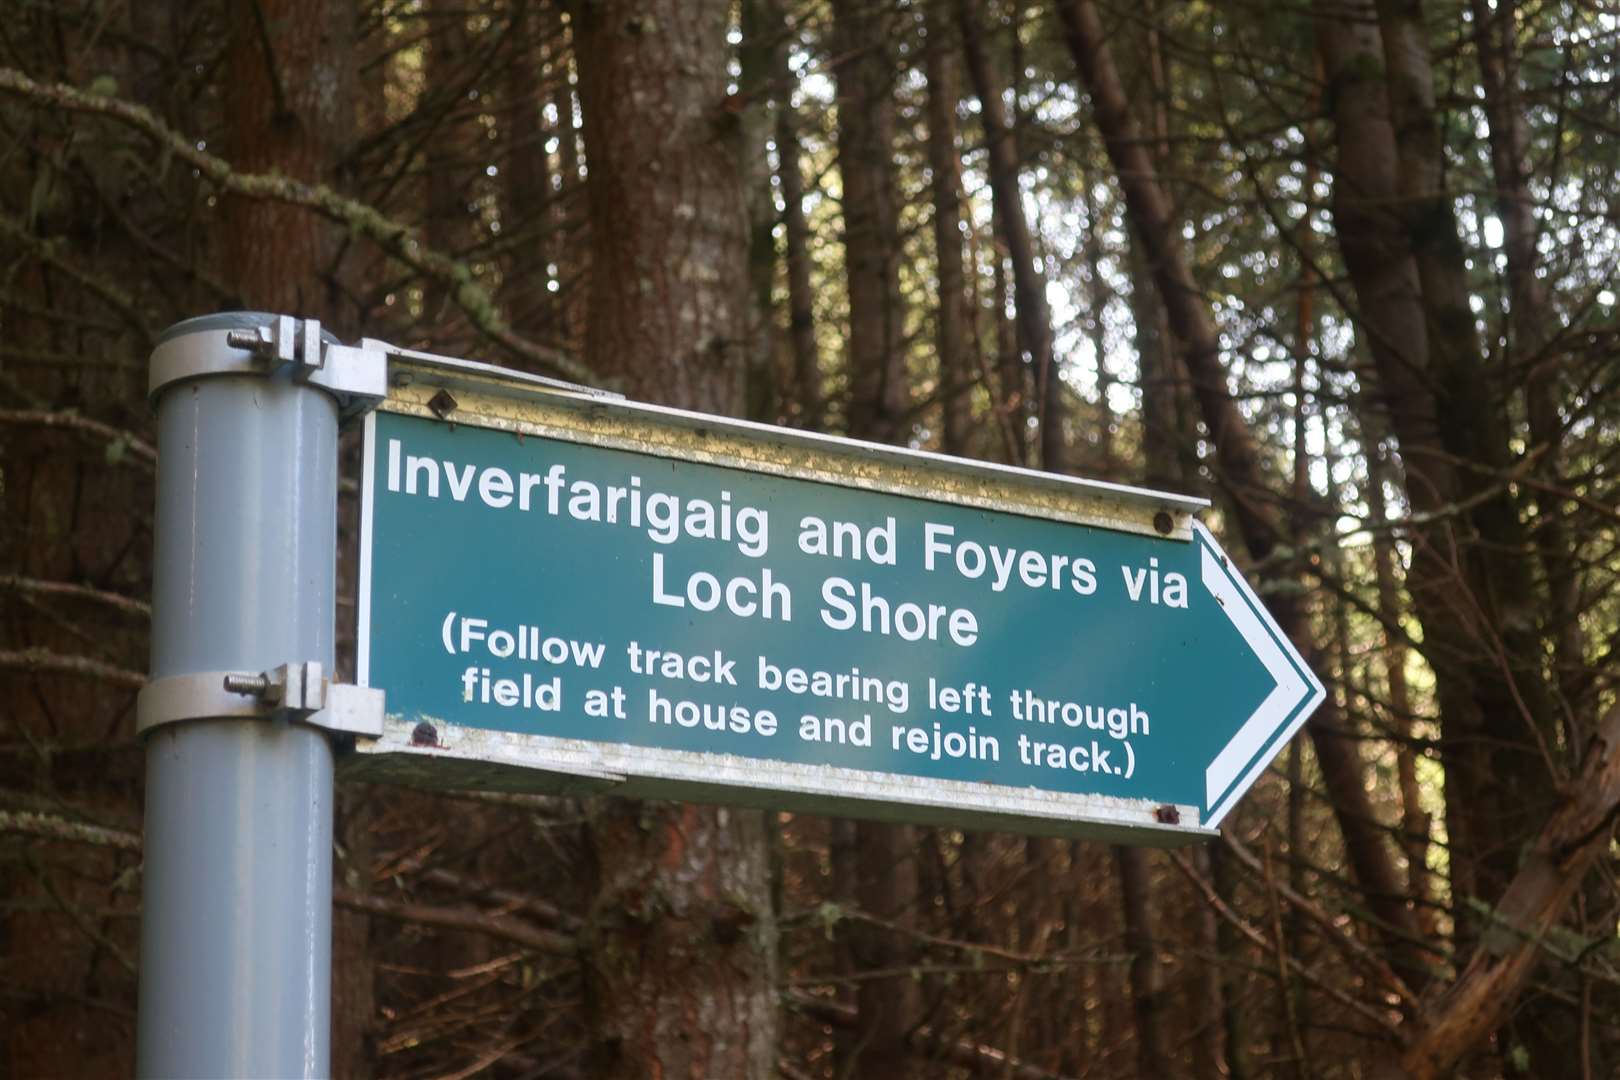 Rights of way sign to Inverfarigaig and Foyers at Boleskine.